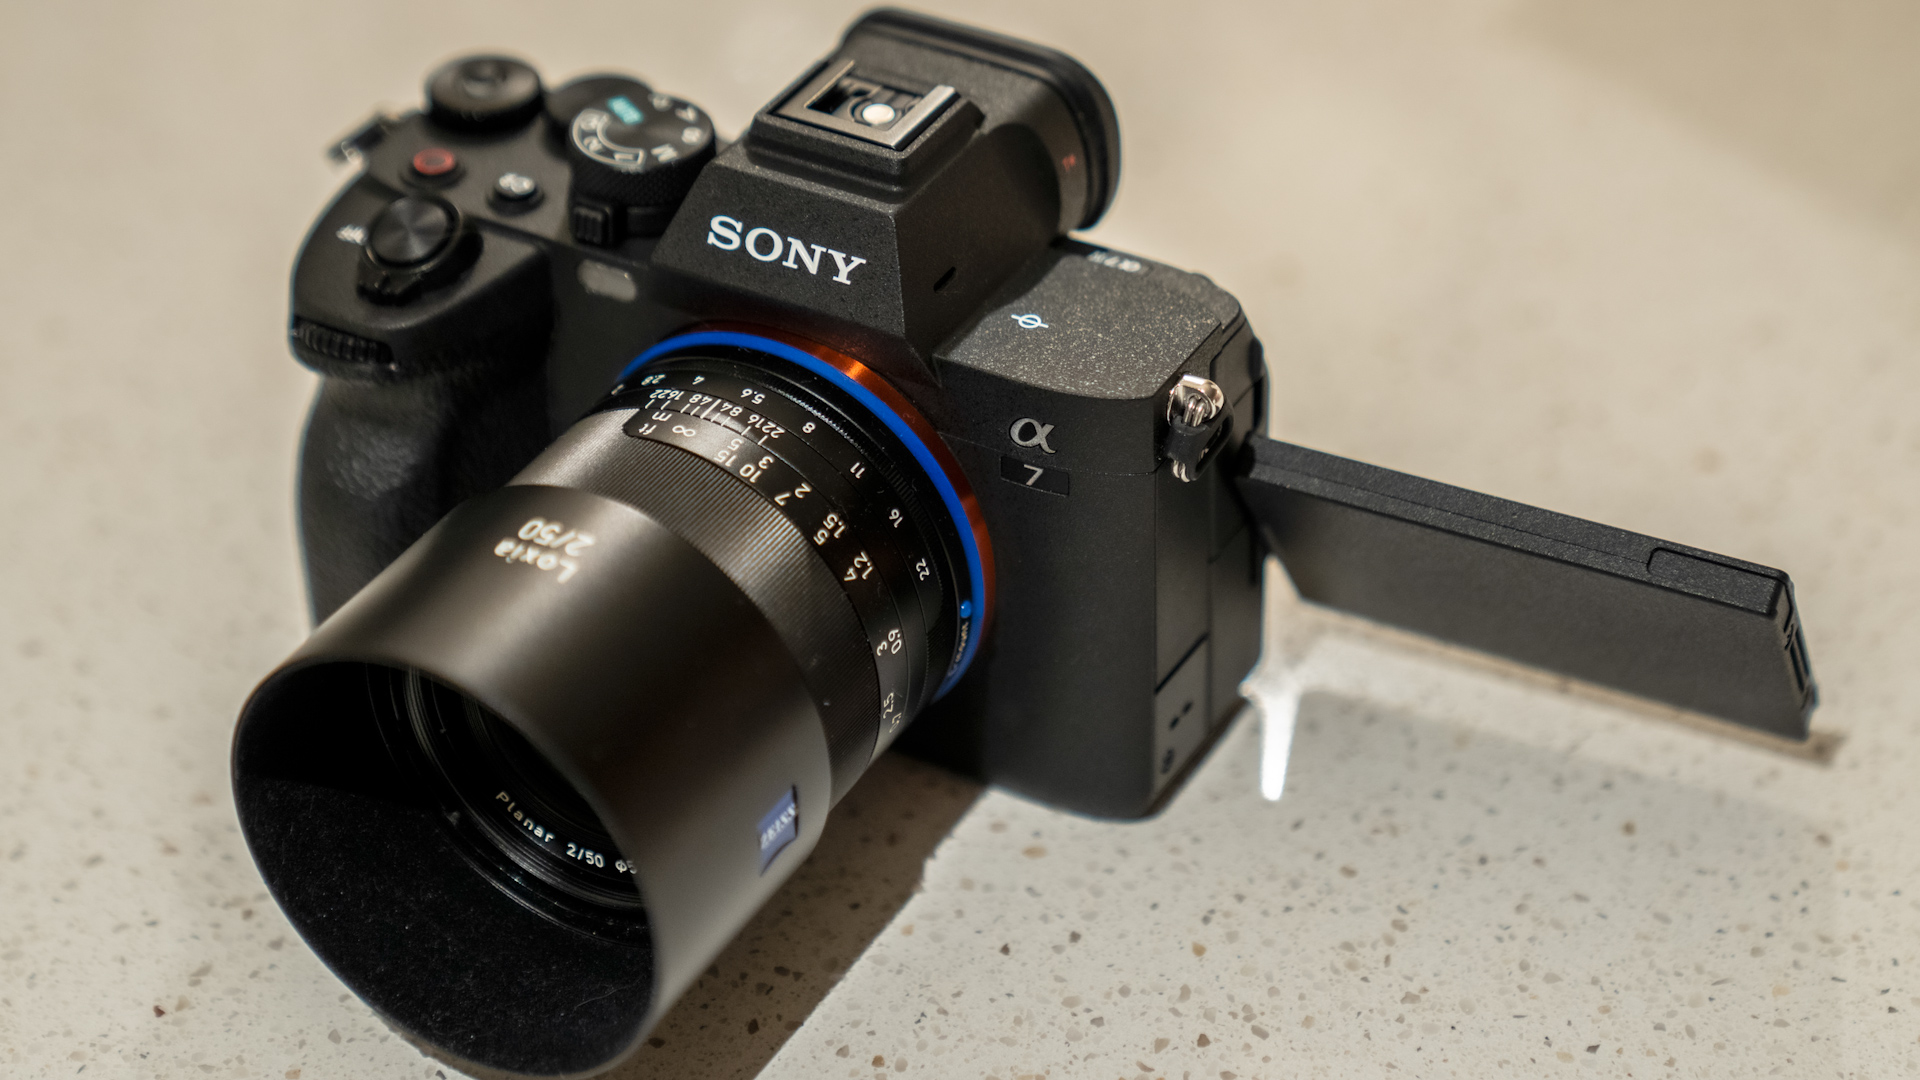 Sony A7 IV Review: The Best All-Around Full-Frame Mirrorless